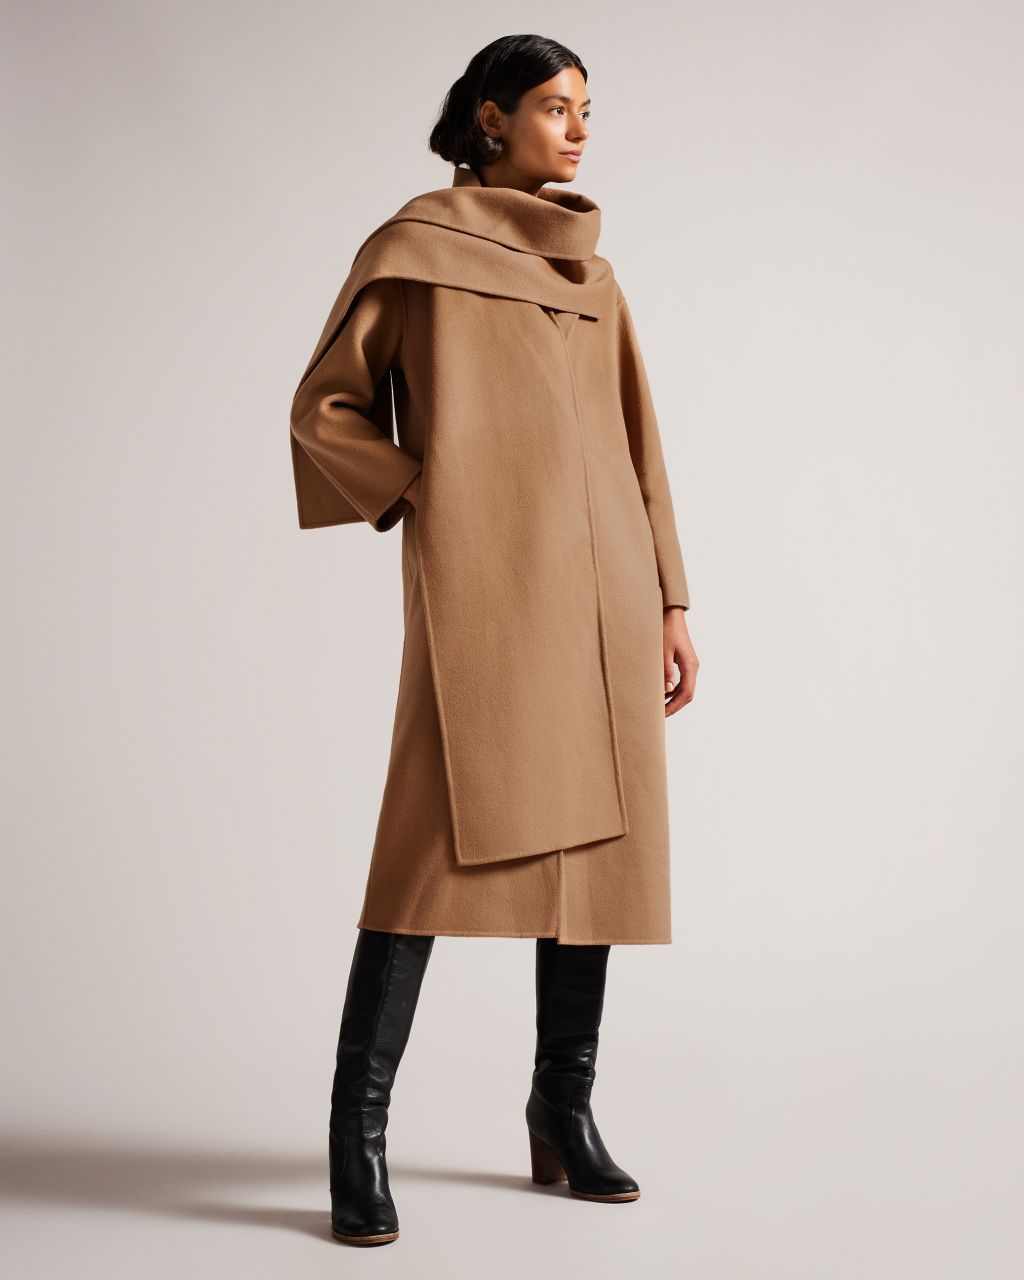 Ted Baker Women's Double Wool Scarf Detail Coat in Camel, Solanna